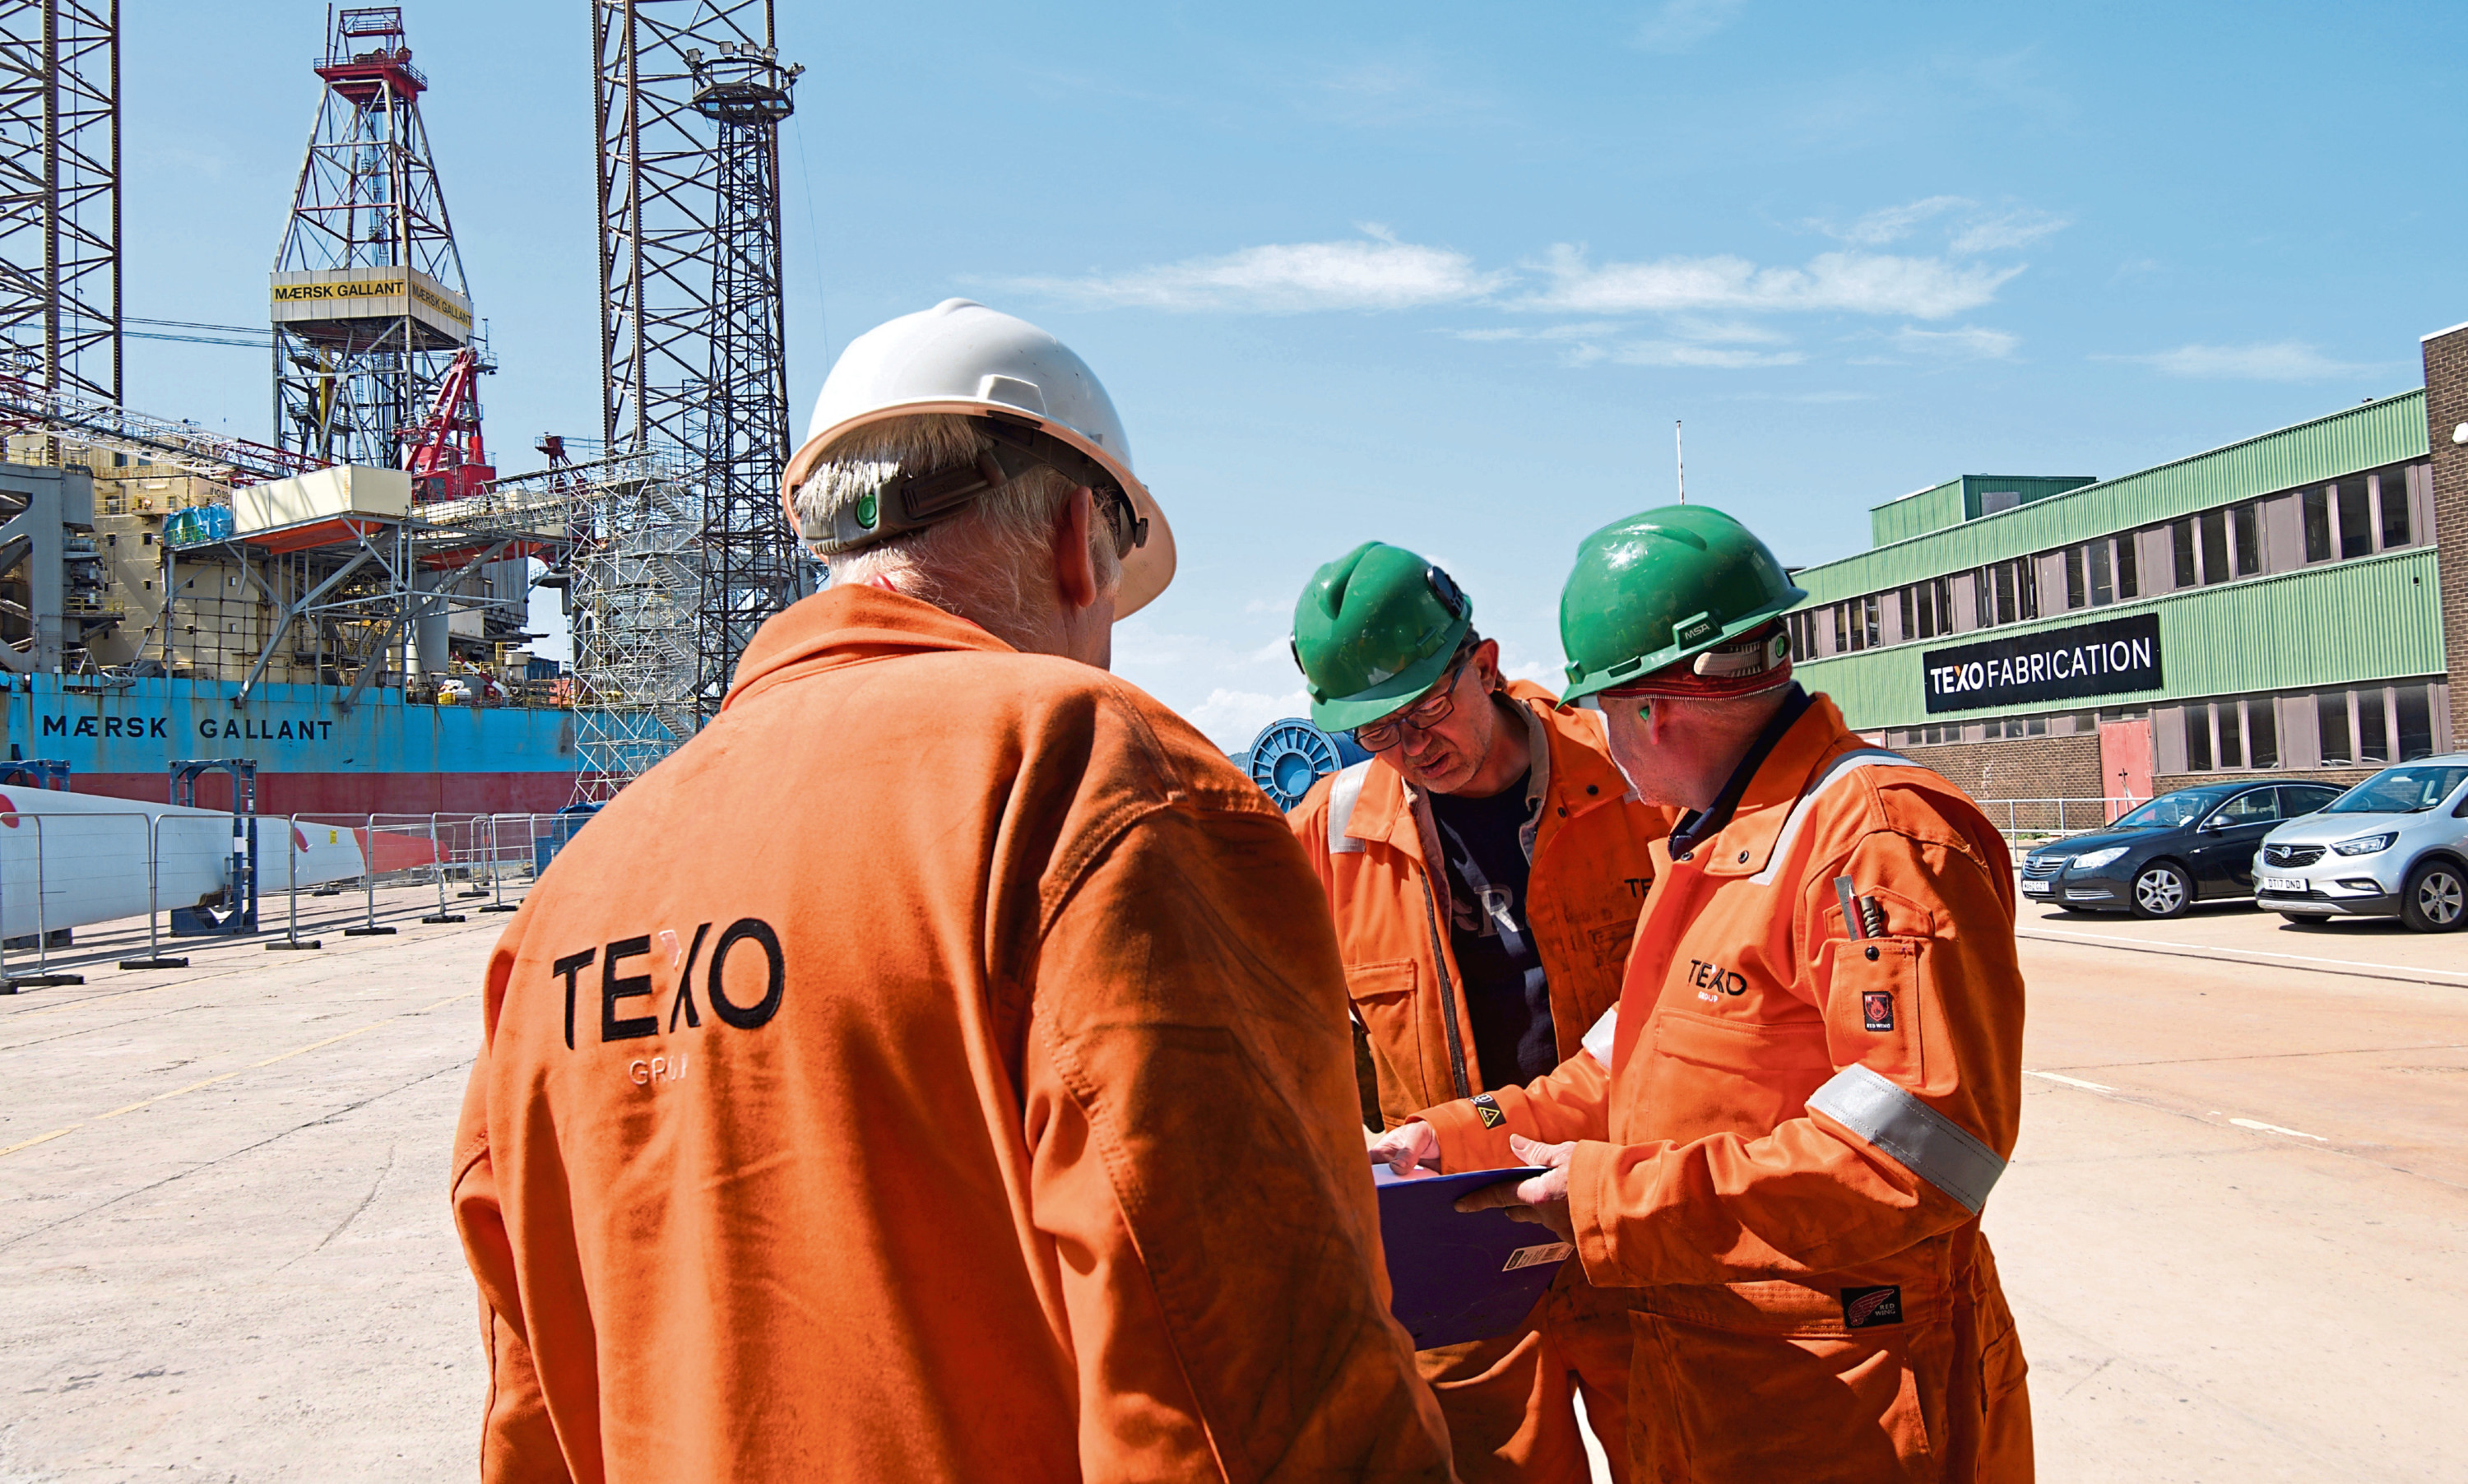 Workers at the Texo Fabrication site at the Port of Dundee.